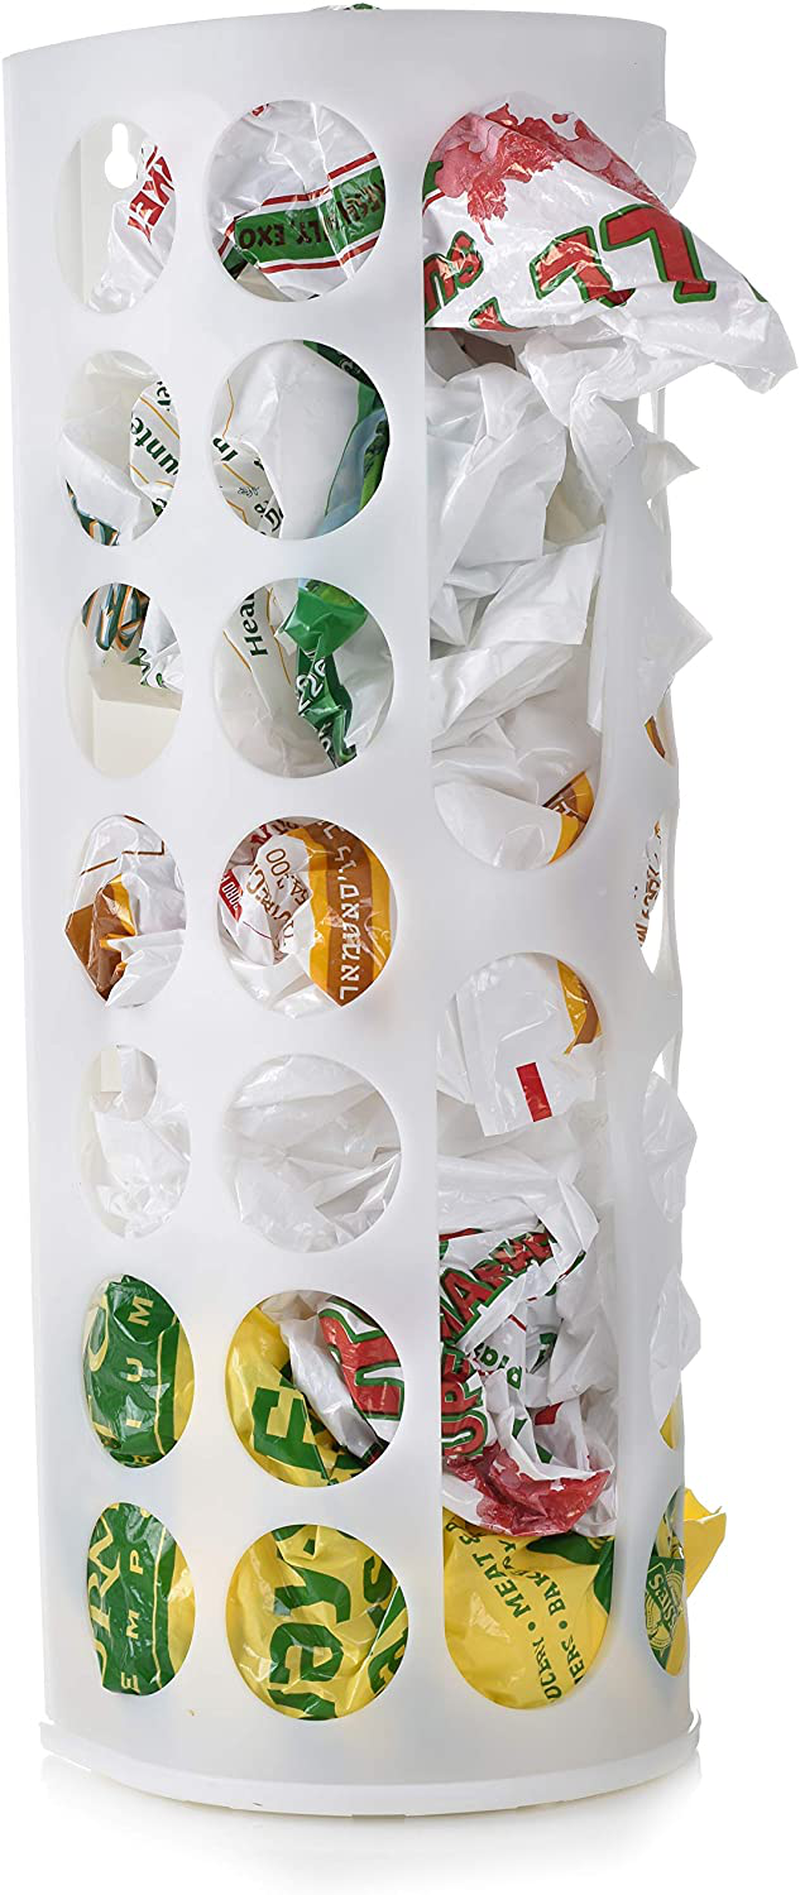 Grocery Bag Storage Holder - This Large Capacity Bag Dispenser Will Neatly Store Plastic Shopping Bags and Keep Them Handy for Reuse. Access Holes Make Adding or Retrieving Bags Simple and Convenient.